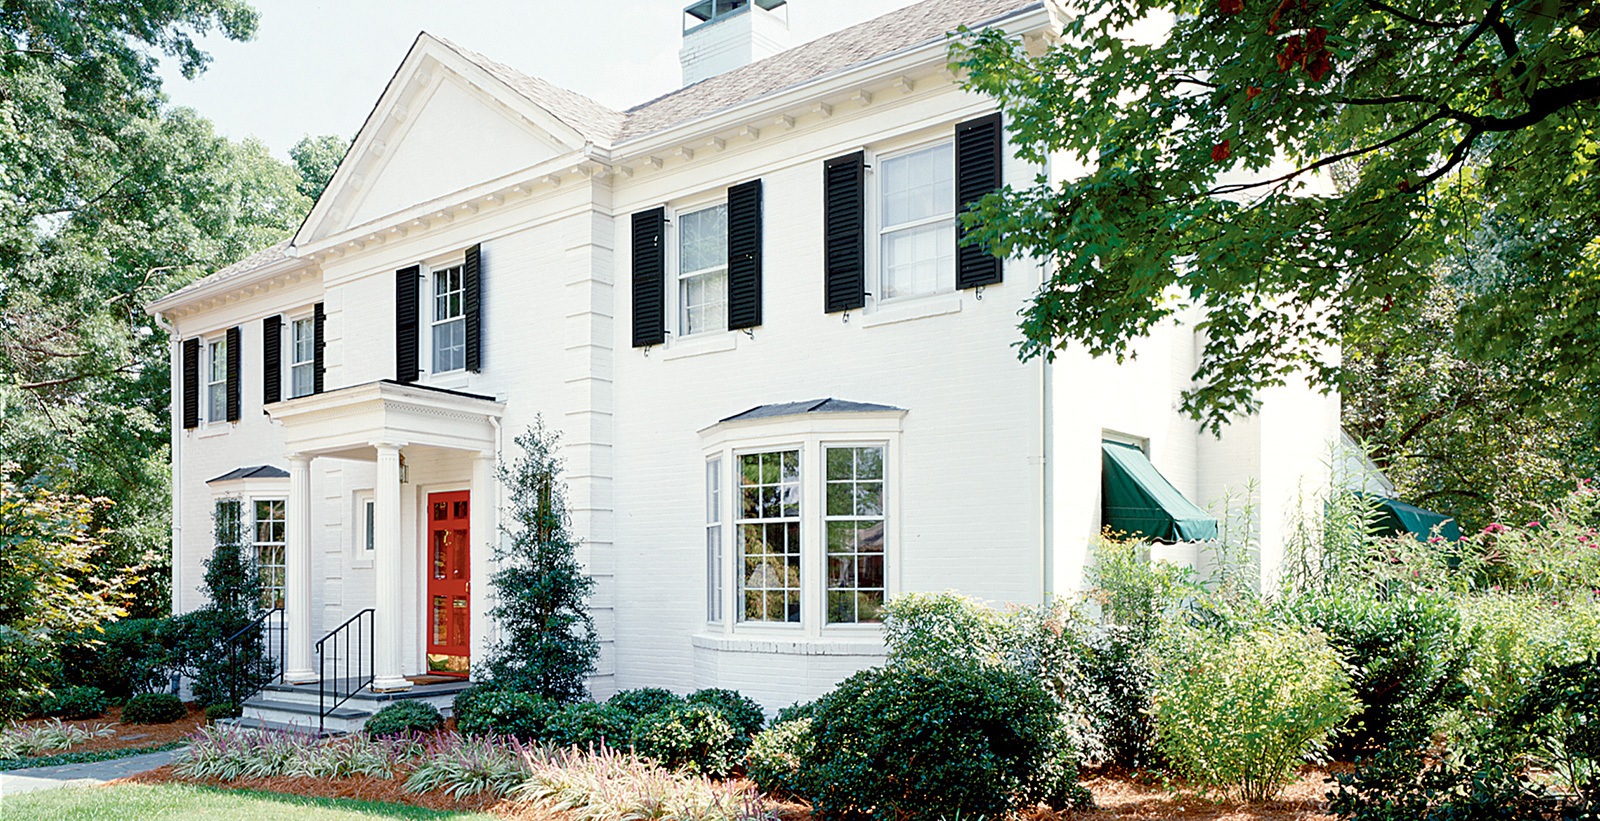 Colonial themed house with white walls, white trim, black shutters, and red door.